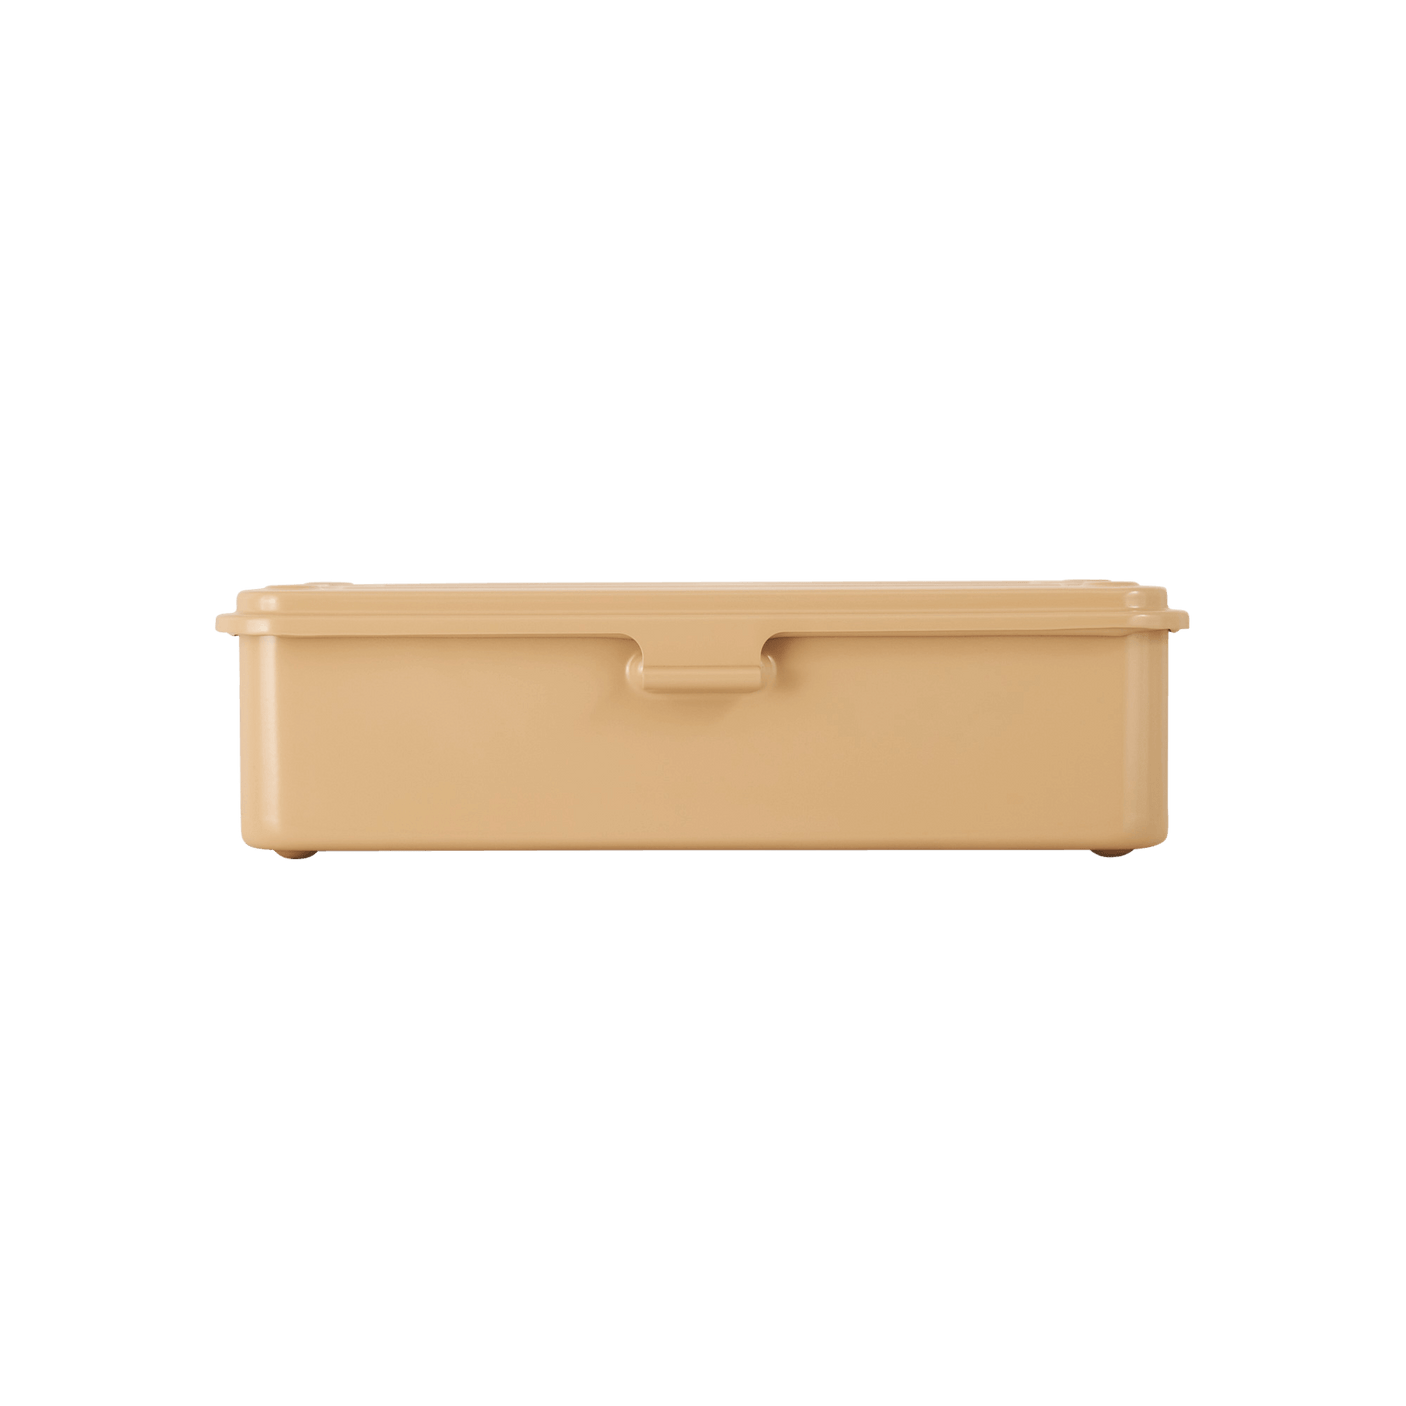 TOYO Trunk Shape Toolbox T-190 BG (Beige) - Tool Bags Boxes and Rolls - Japanese Tools Australia